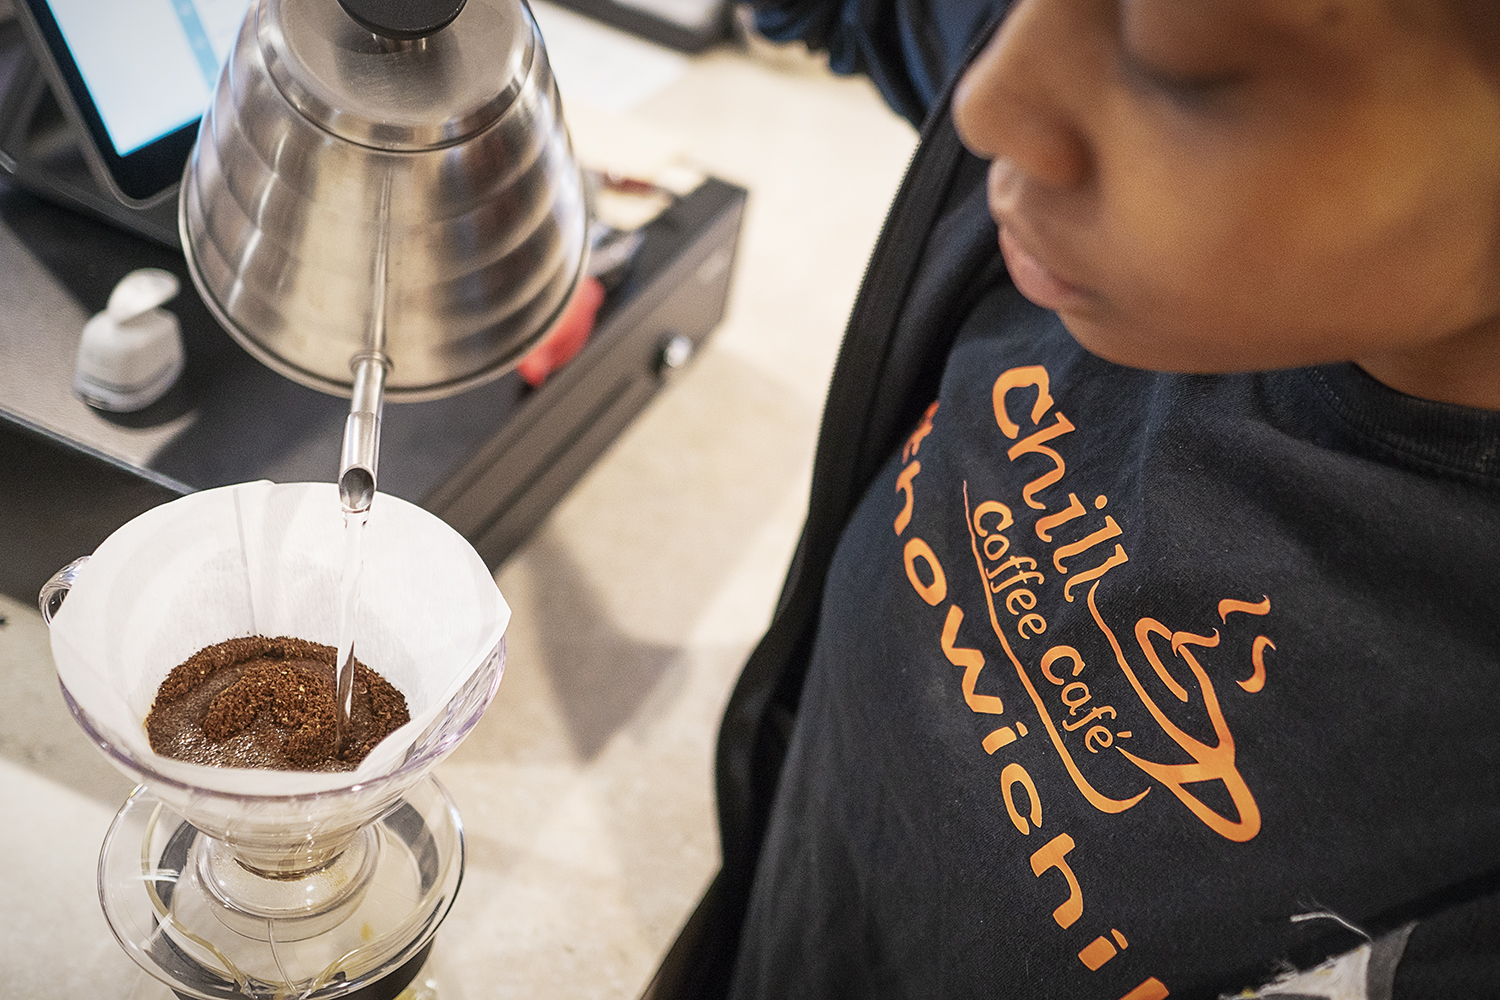 Flint, MI - Friday, June 15, 2018: Barista Cha'Quia Jones, 20, from Flint, prepares a cup of pour over coffee at Chill Coffee Cafe.